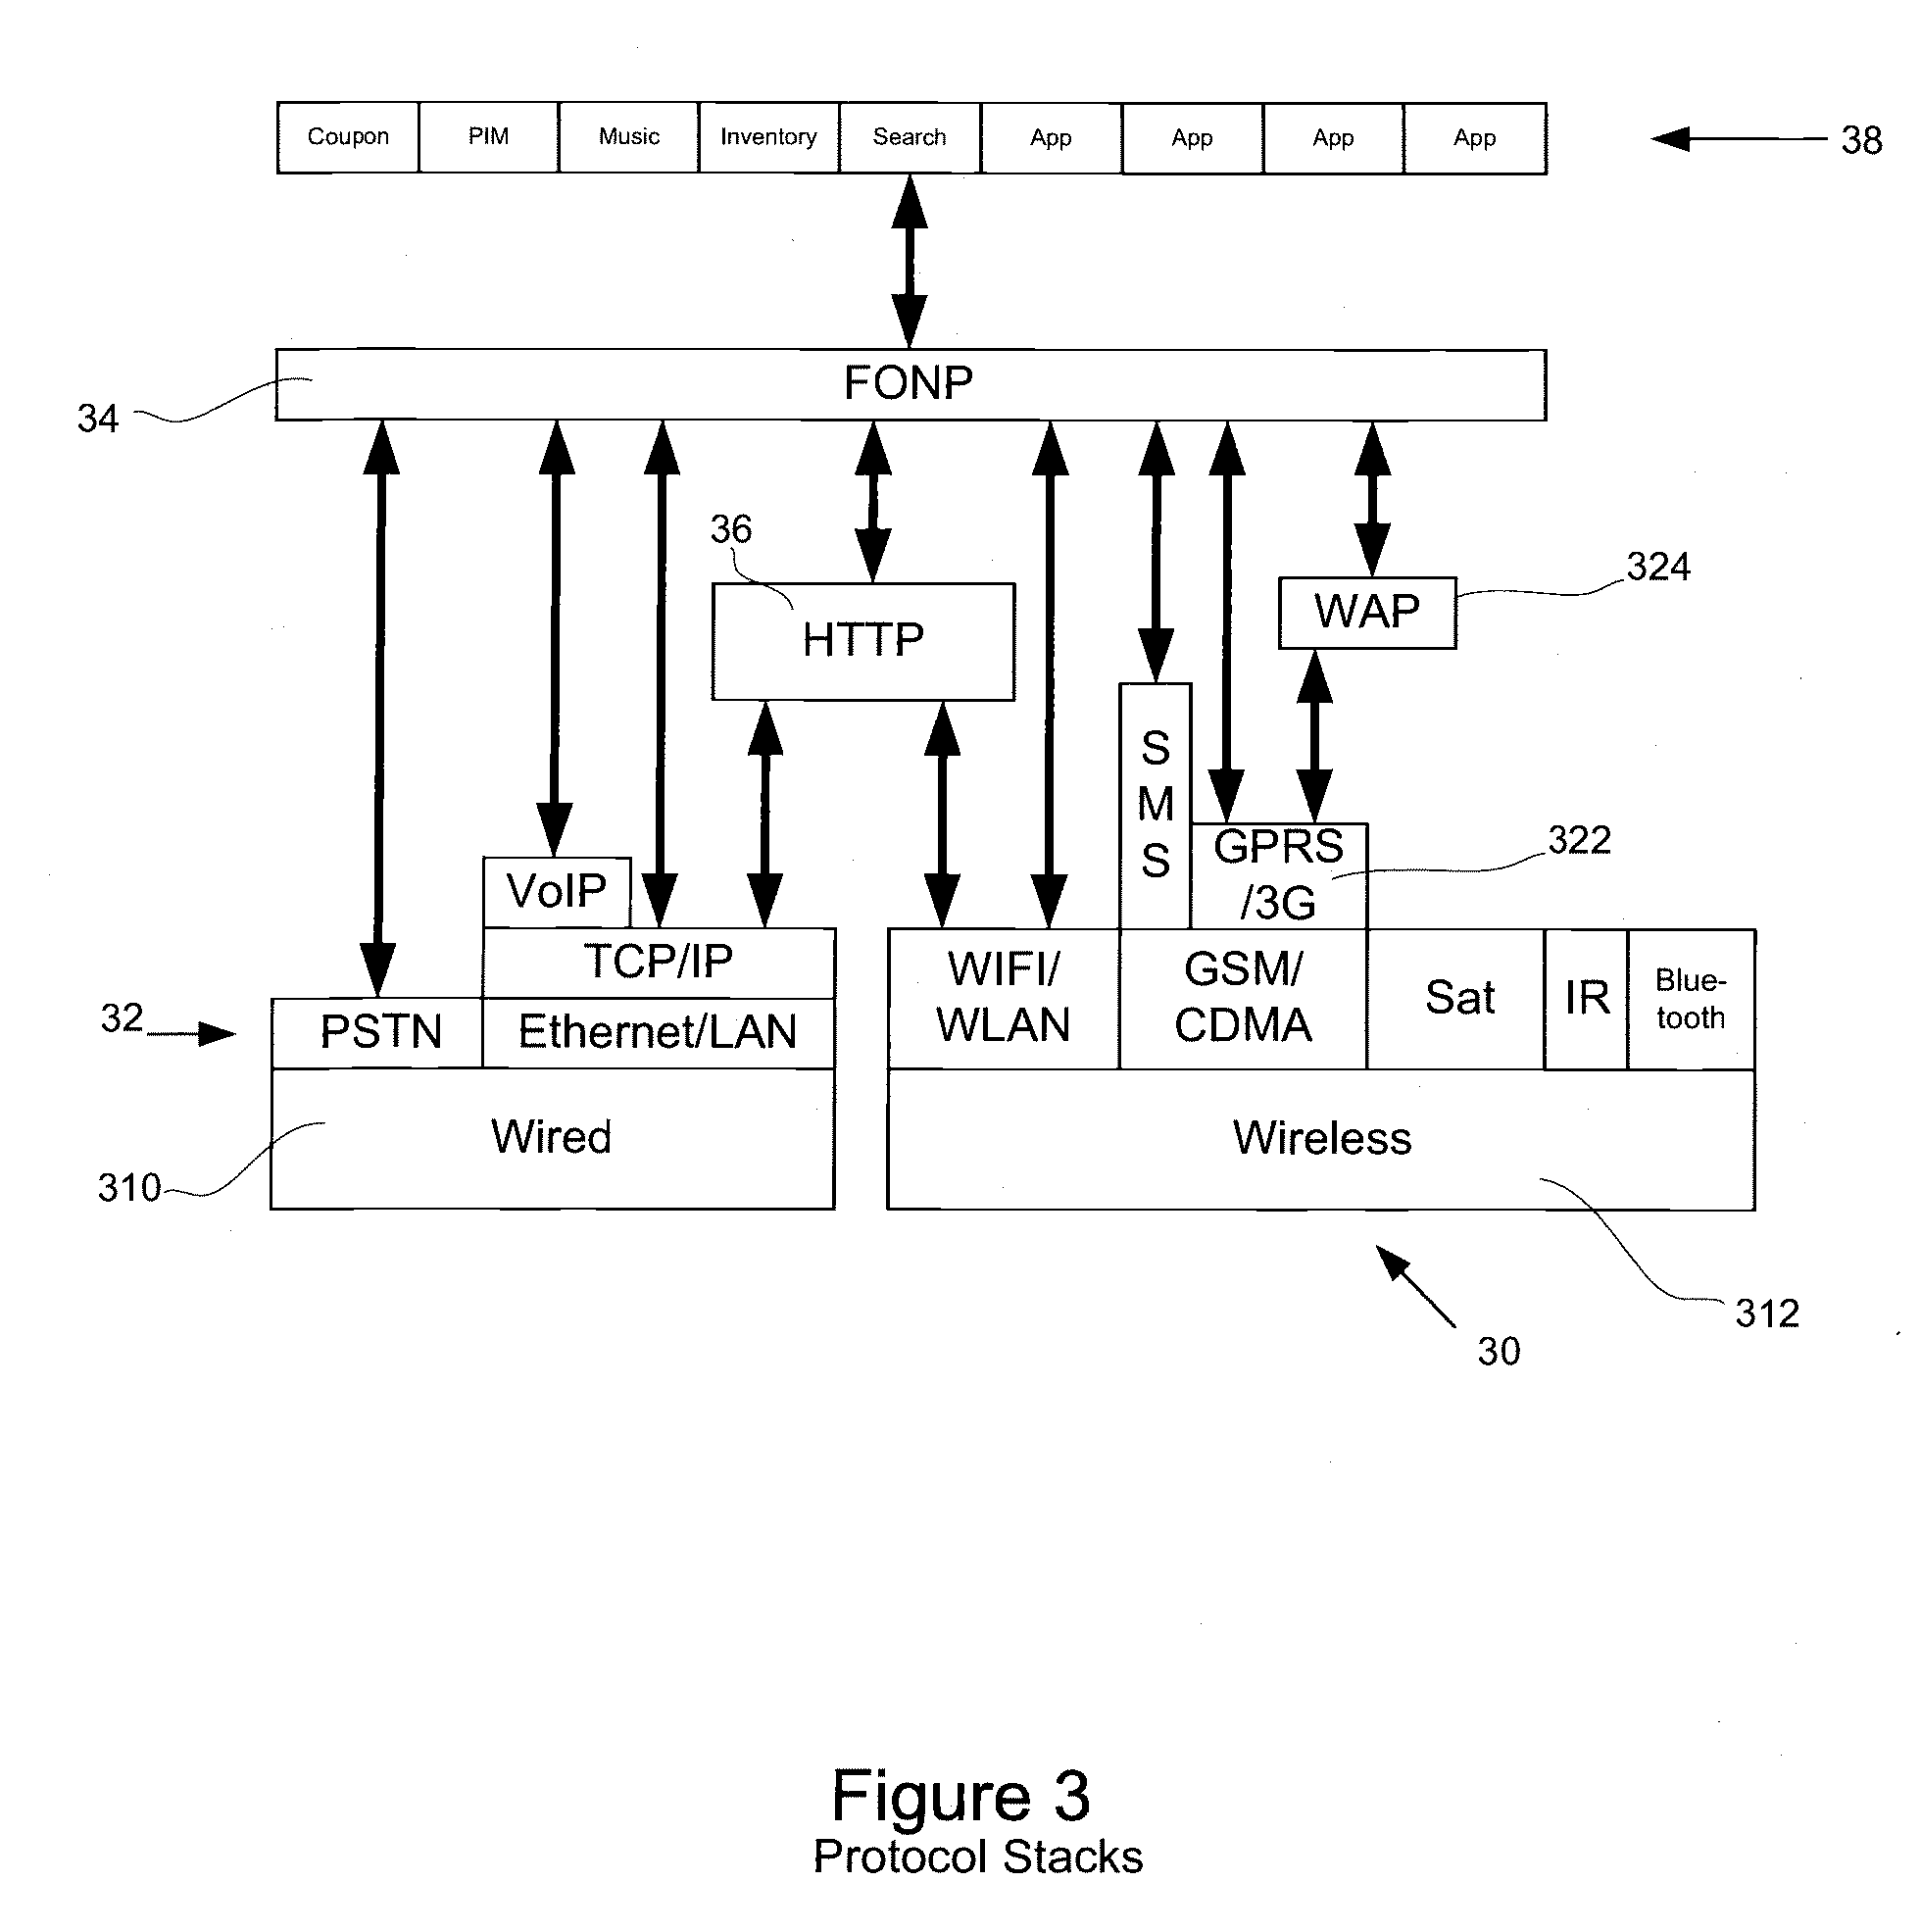 Platform for telephone-optimized data and voice services